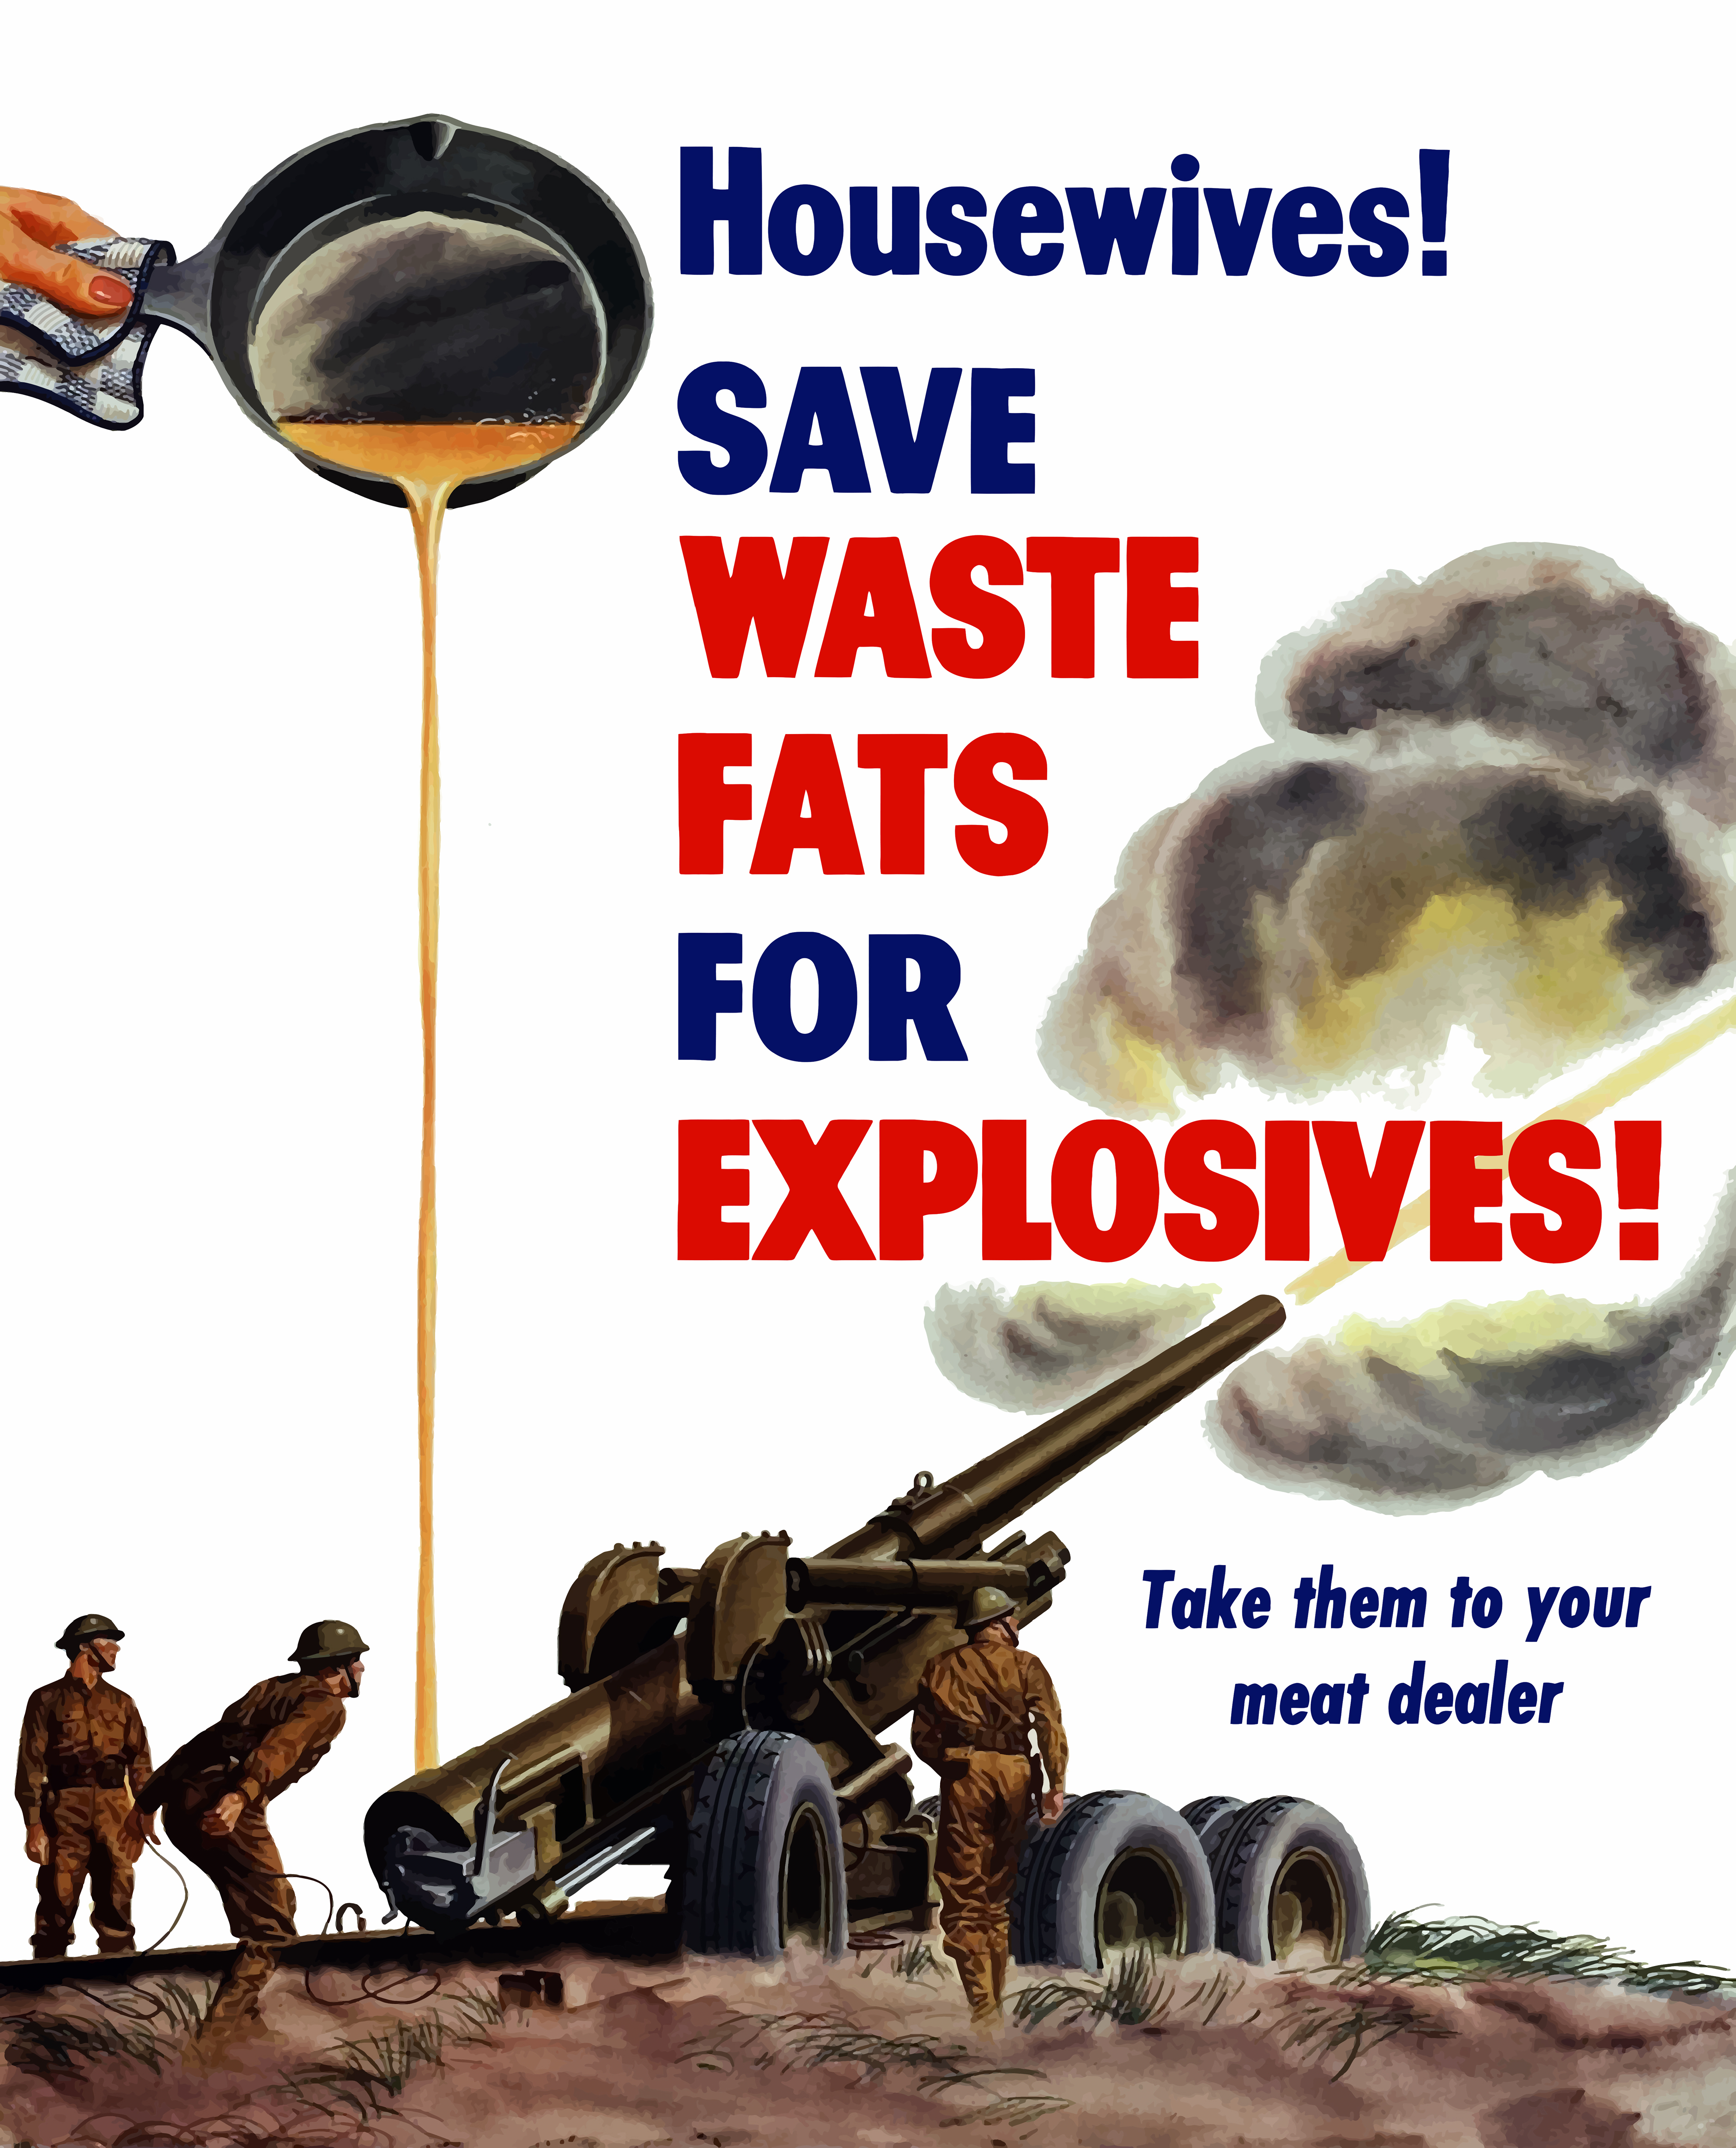 Vintage World War II poster of grease from a frying pan being poured into a firing artillery gun. It reads, Housewives! Save waste fats for explosives! Take them your meat dealer.